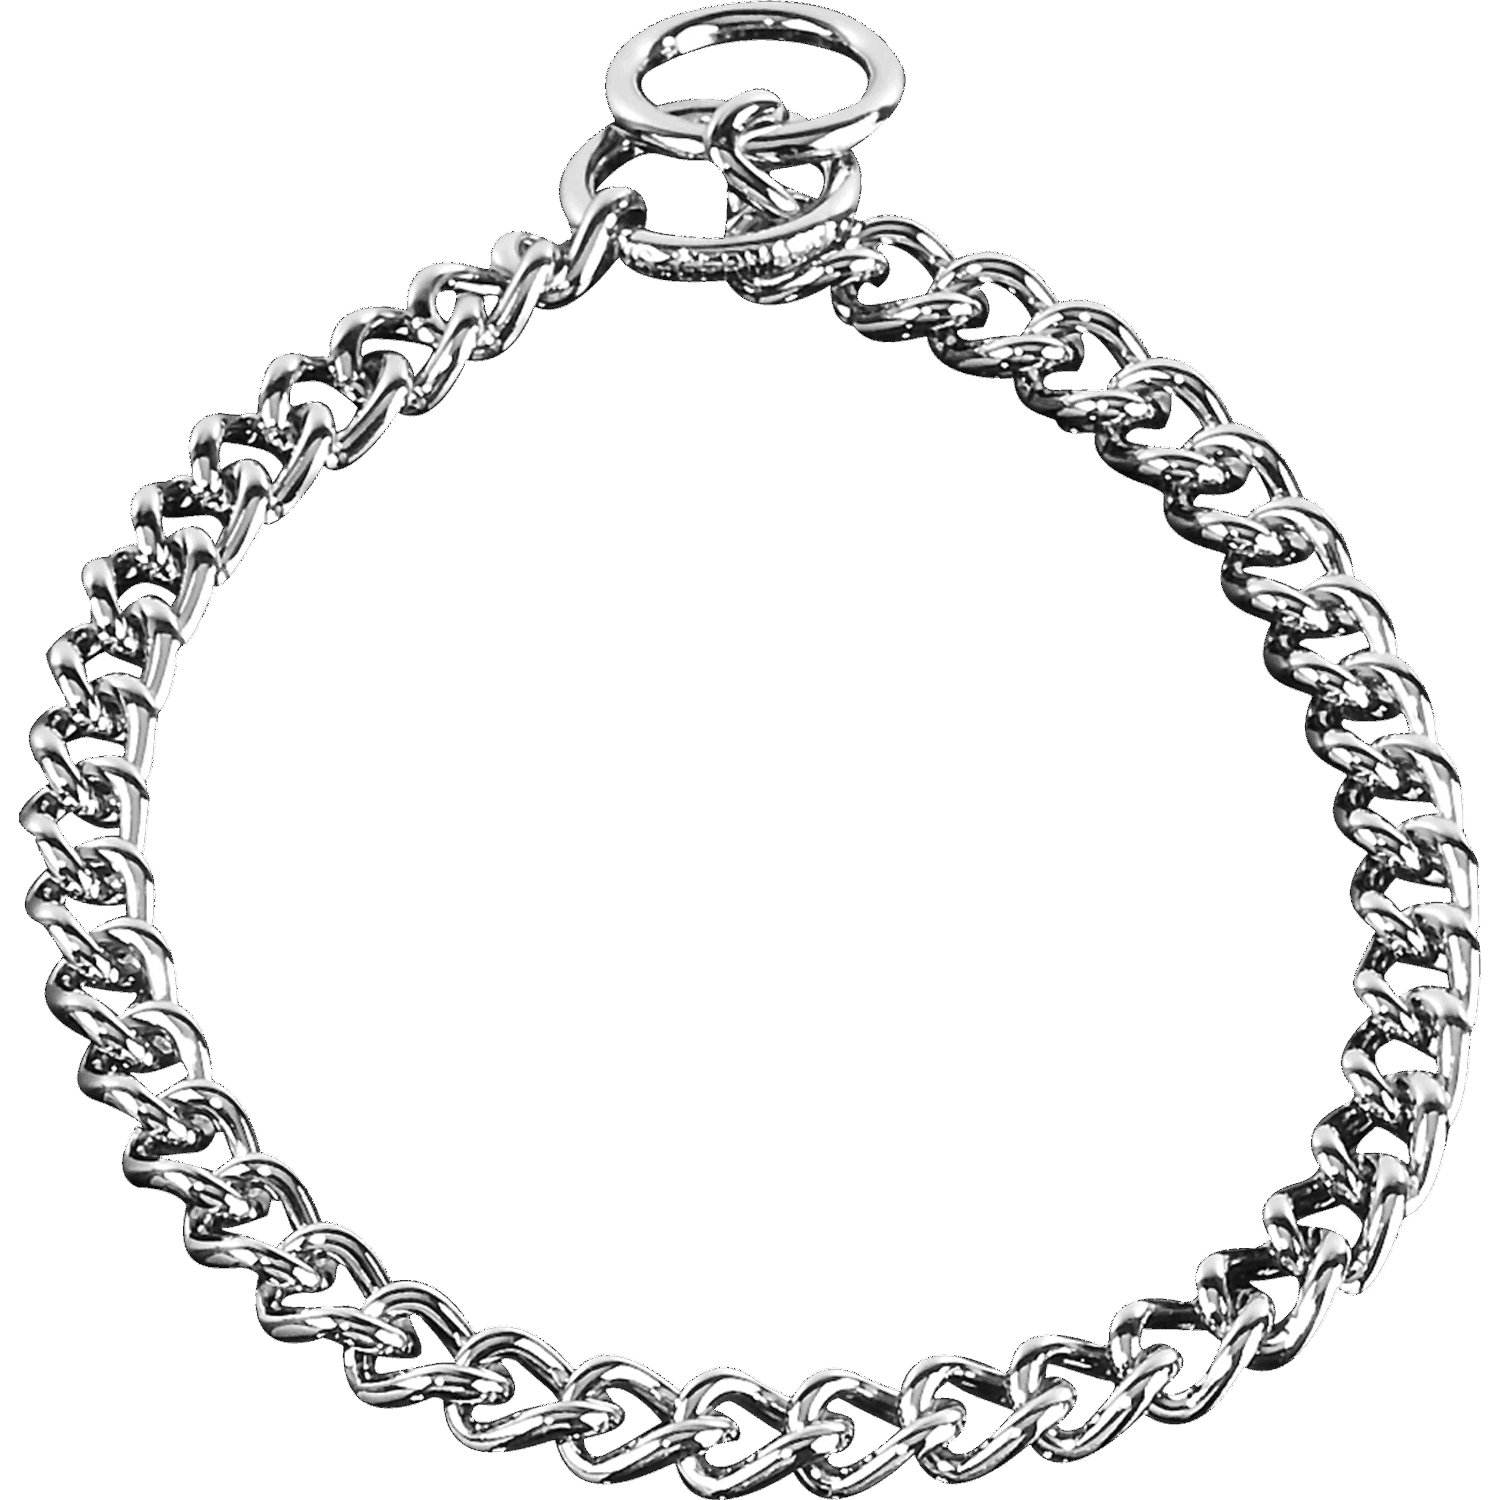 Narrow Round Chain Link Collar (Steel Chrome-Plated) - 4mm